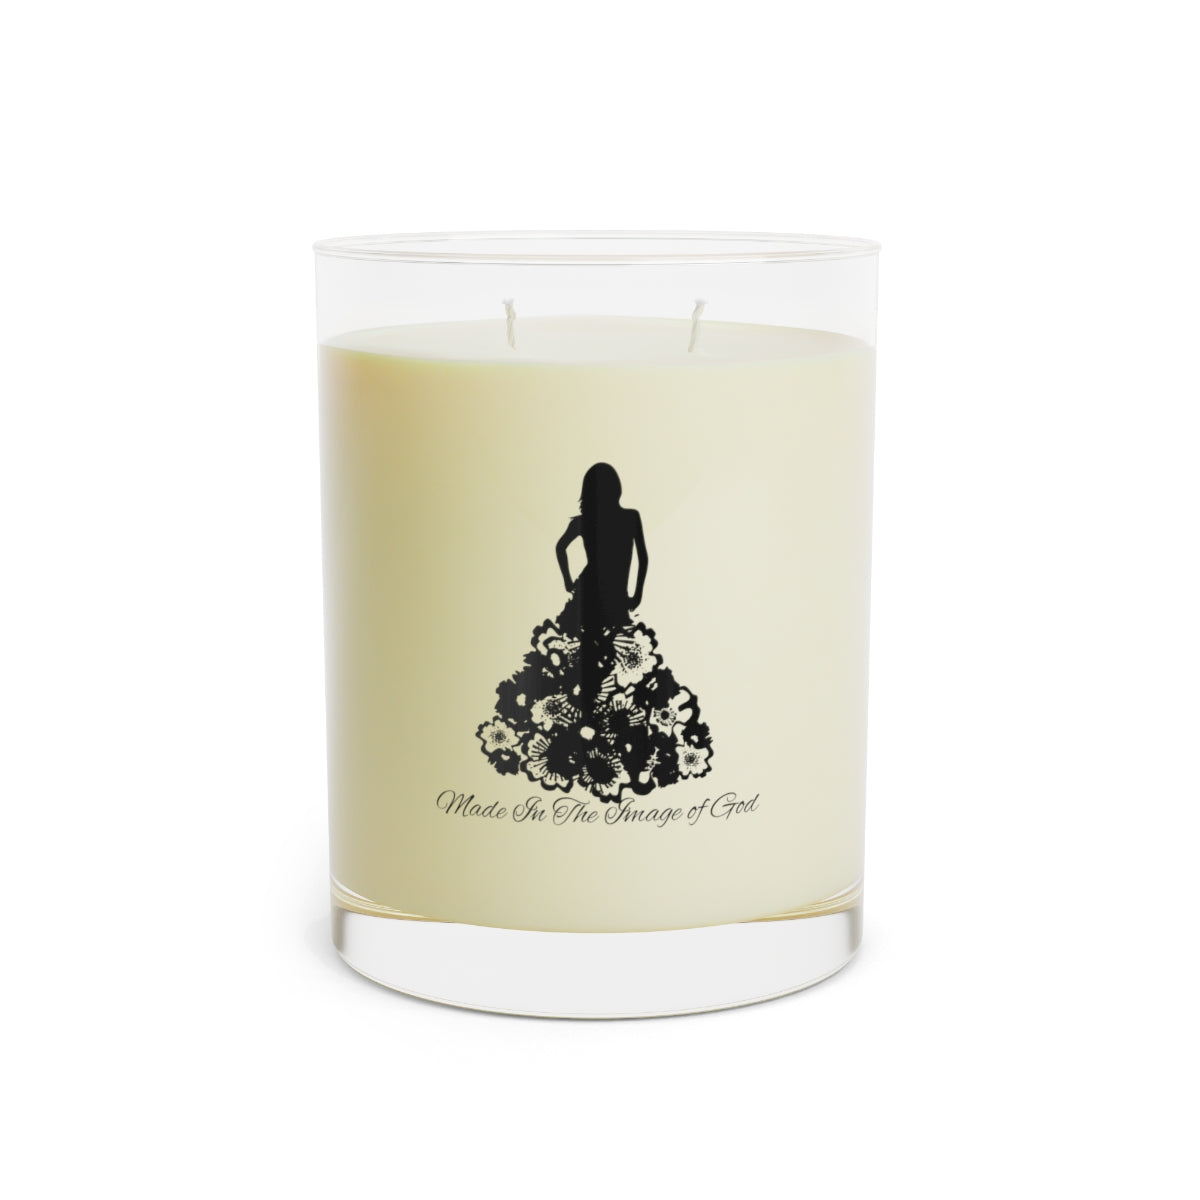 Made In Image of GOD Scented Candle - Full Glass, 11oz